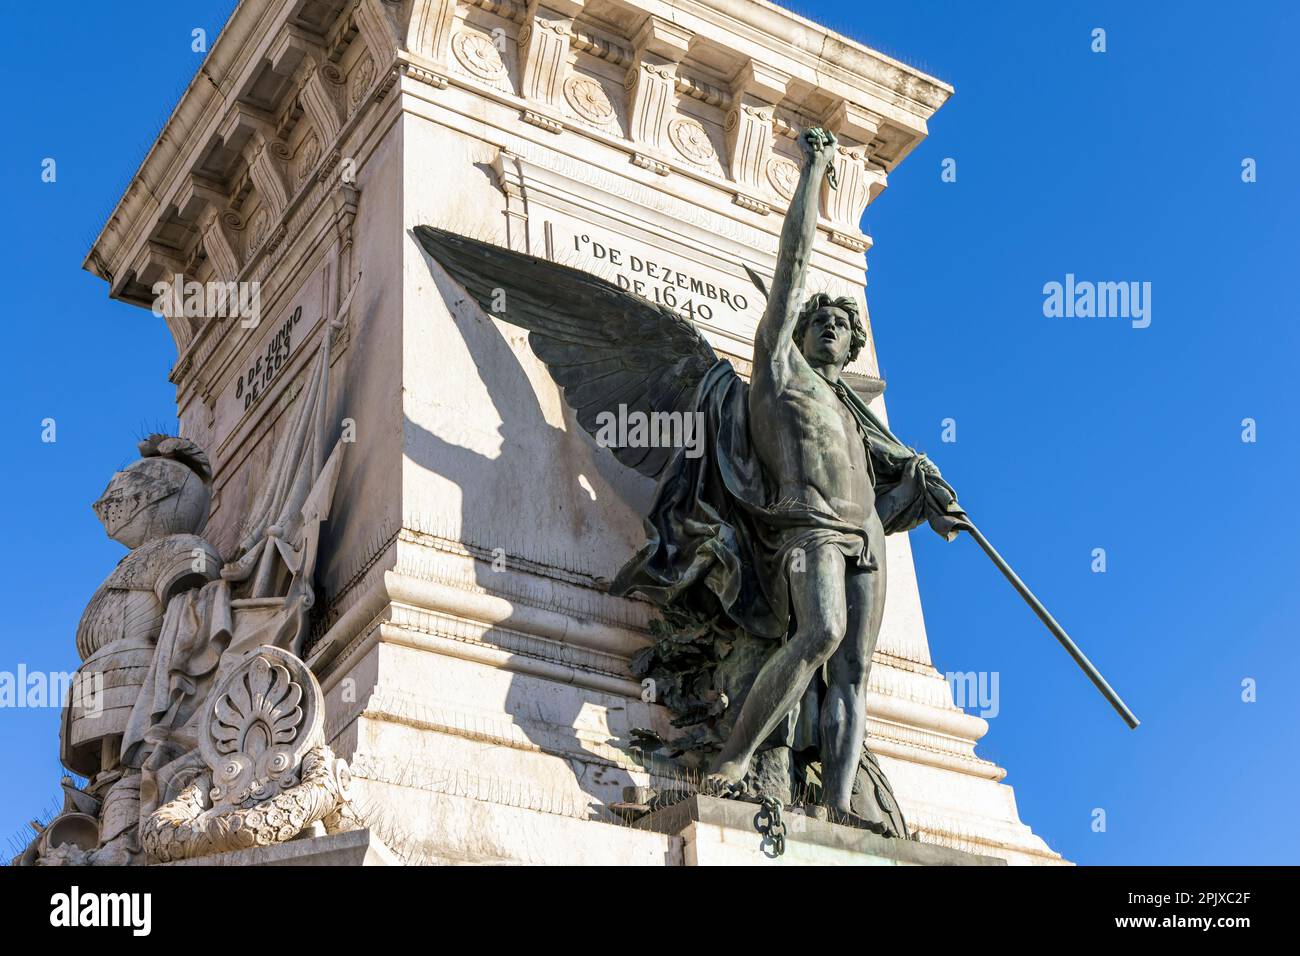 Sculpture at the Monument to the Restorers, in Lisbon, Portugal - commemorating the victory of the Portuguese Restoration War. Stock Photo